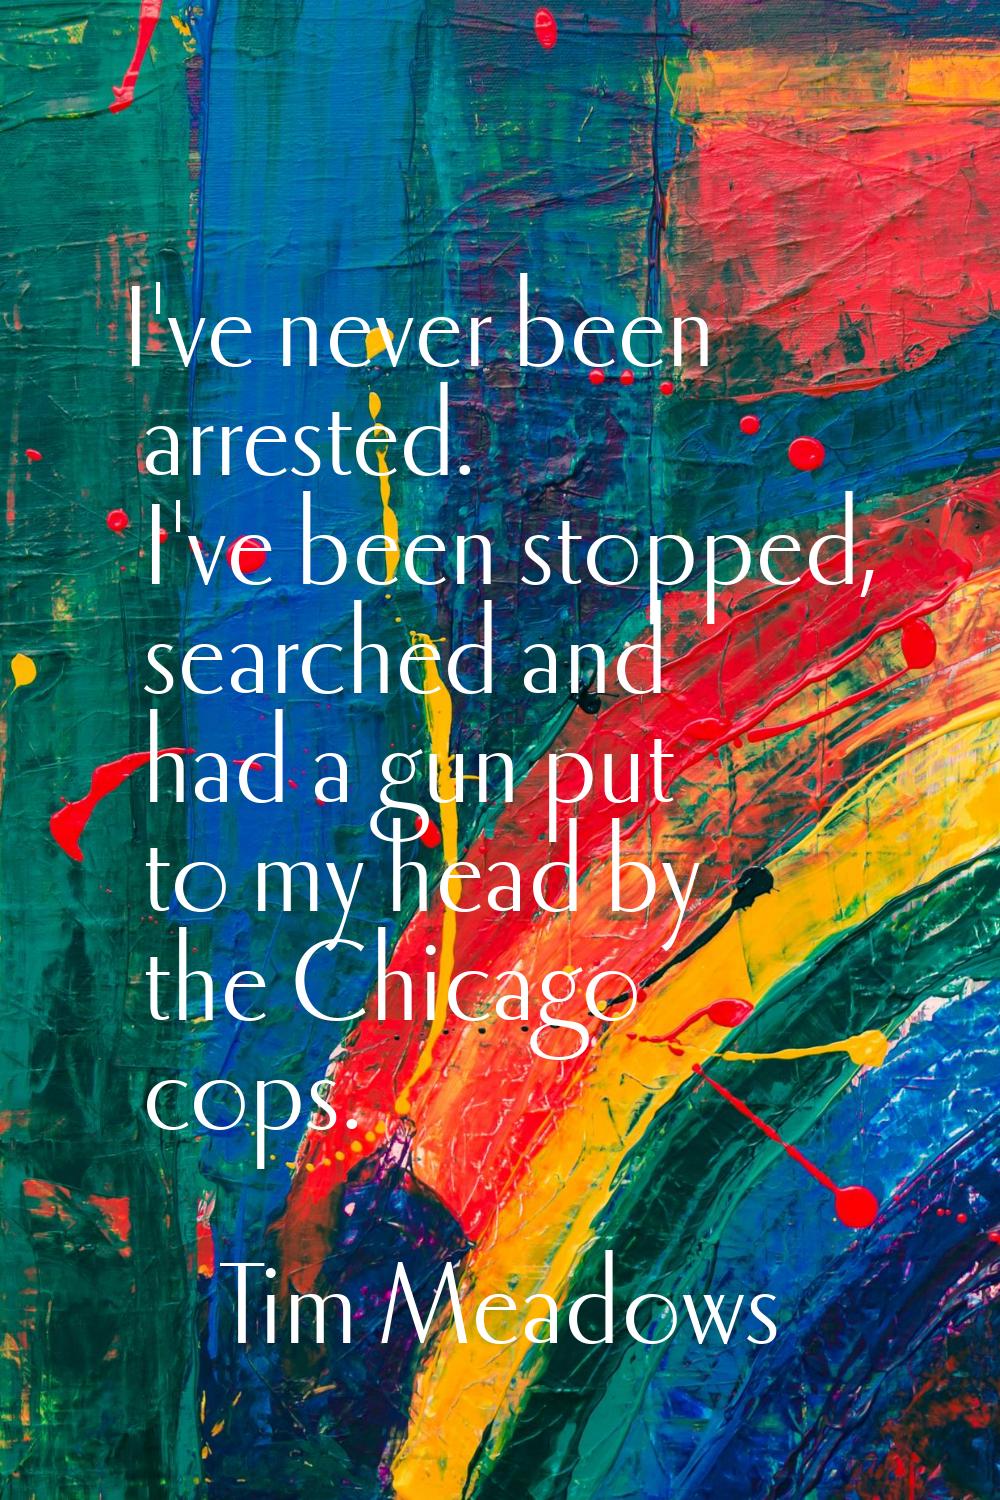 I've never been arrested. I've been stopped, searched and had a gun put to my head by the Chicago c